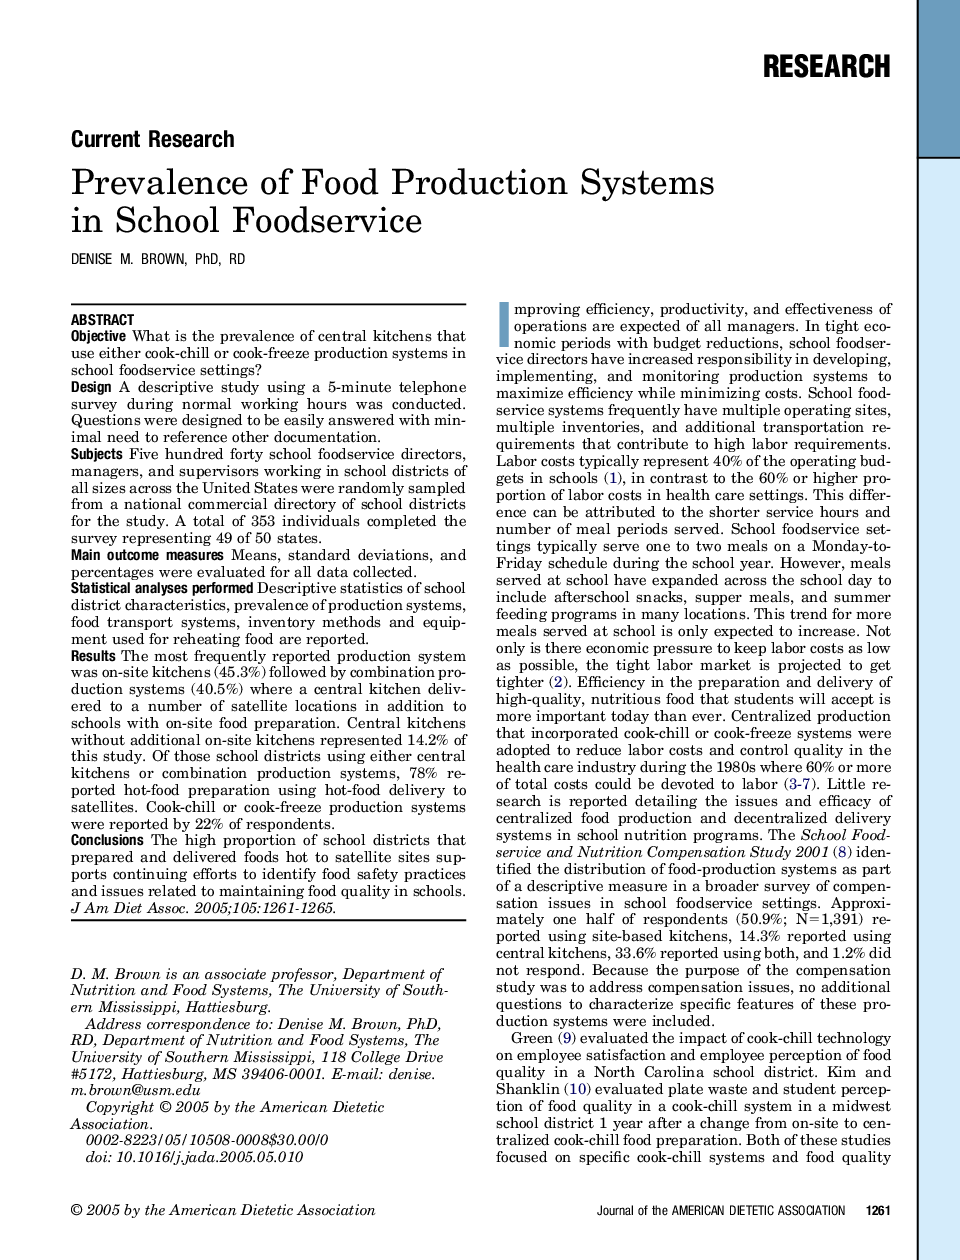 Prevalence of Food Production Systems in School Foodservice